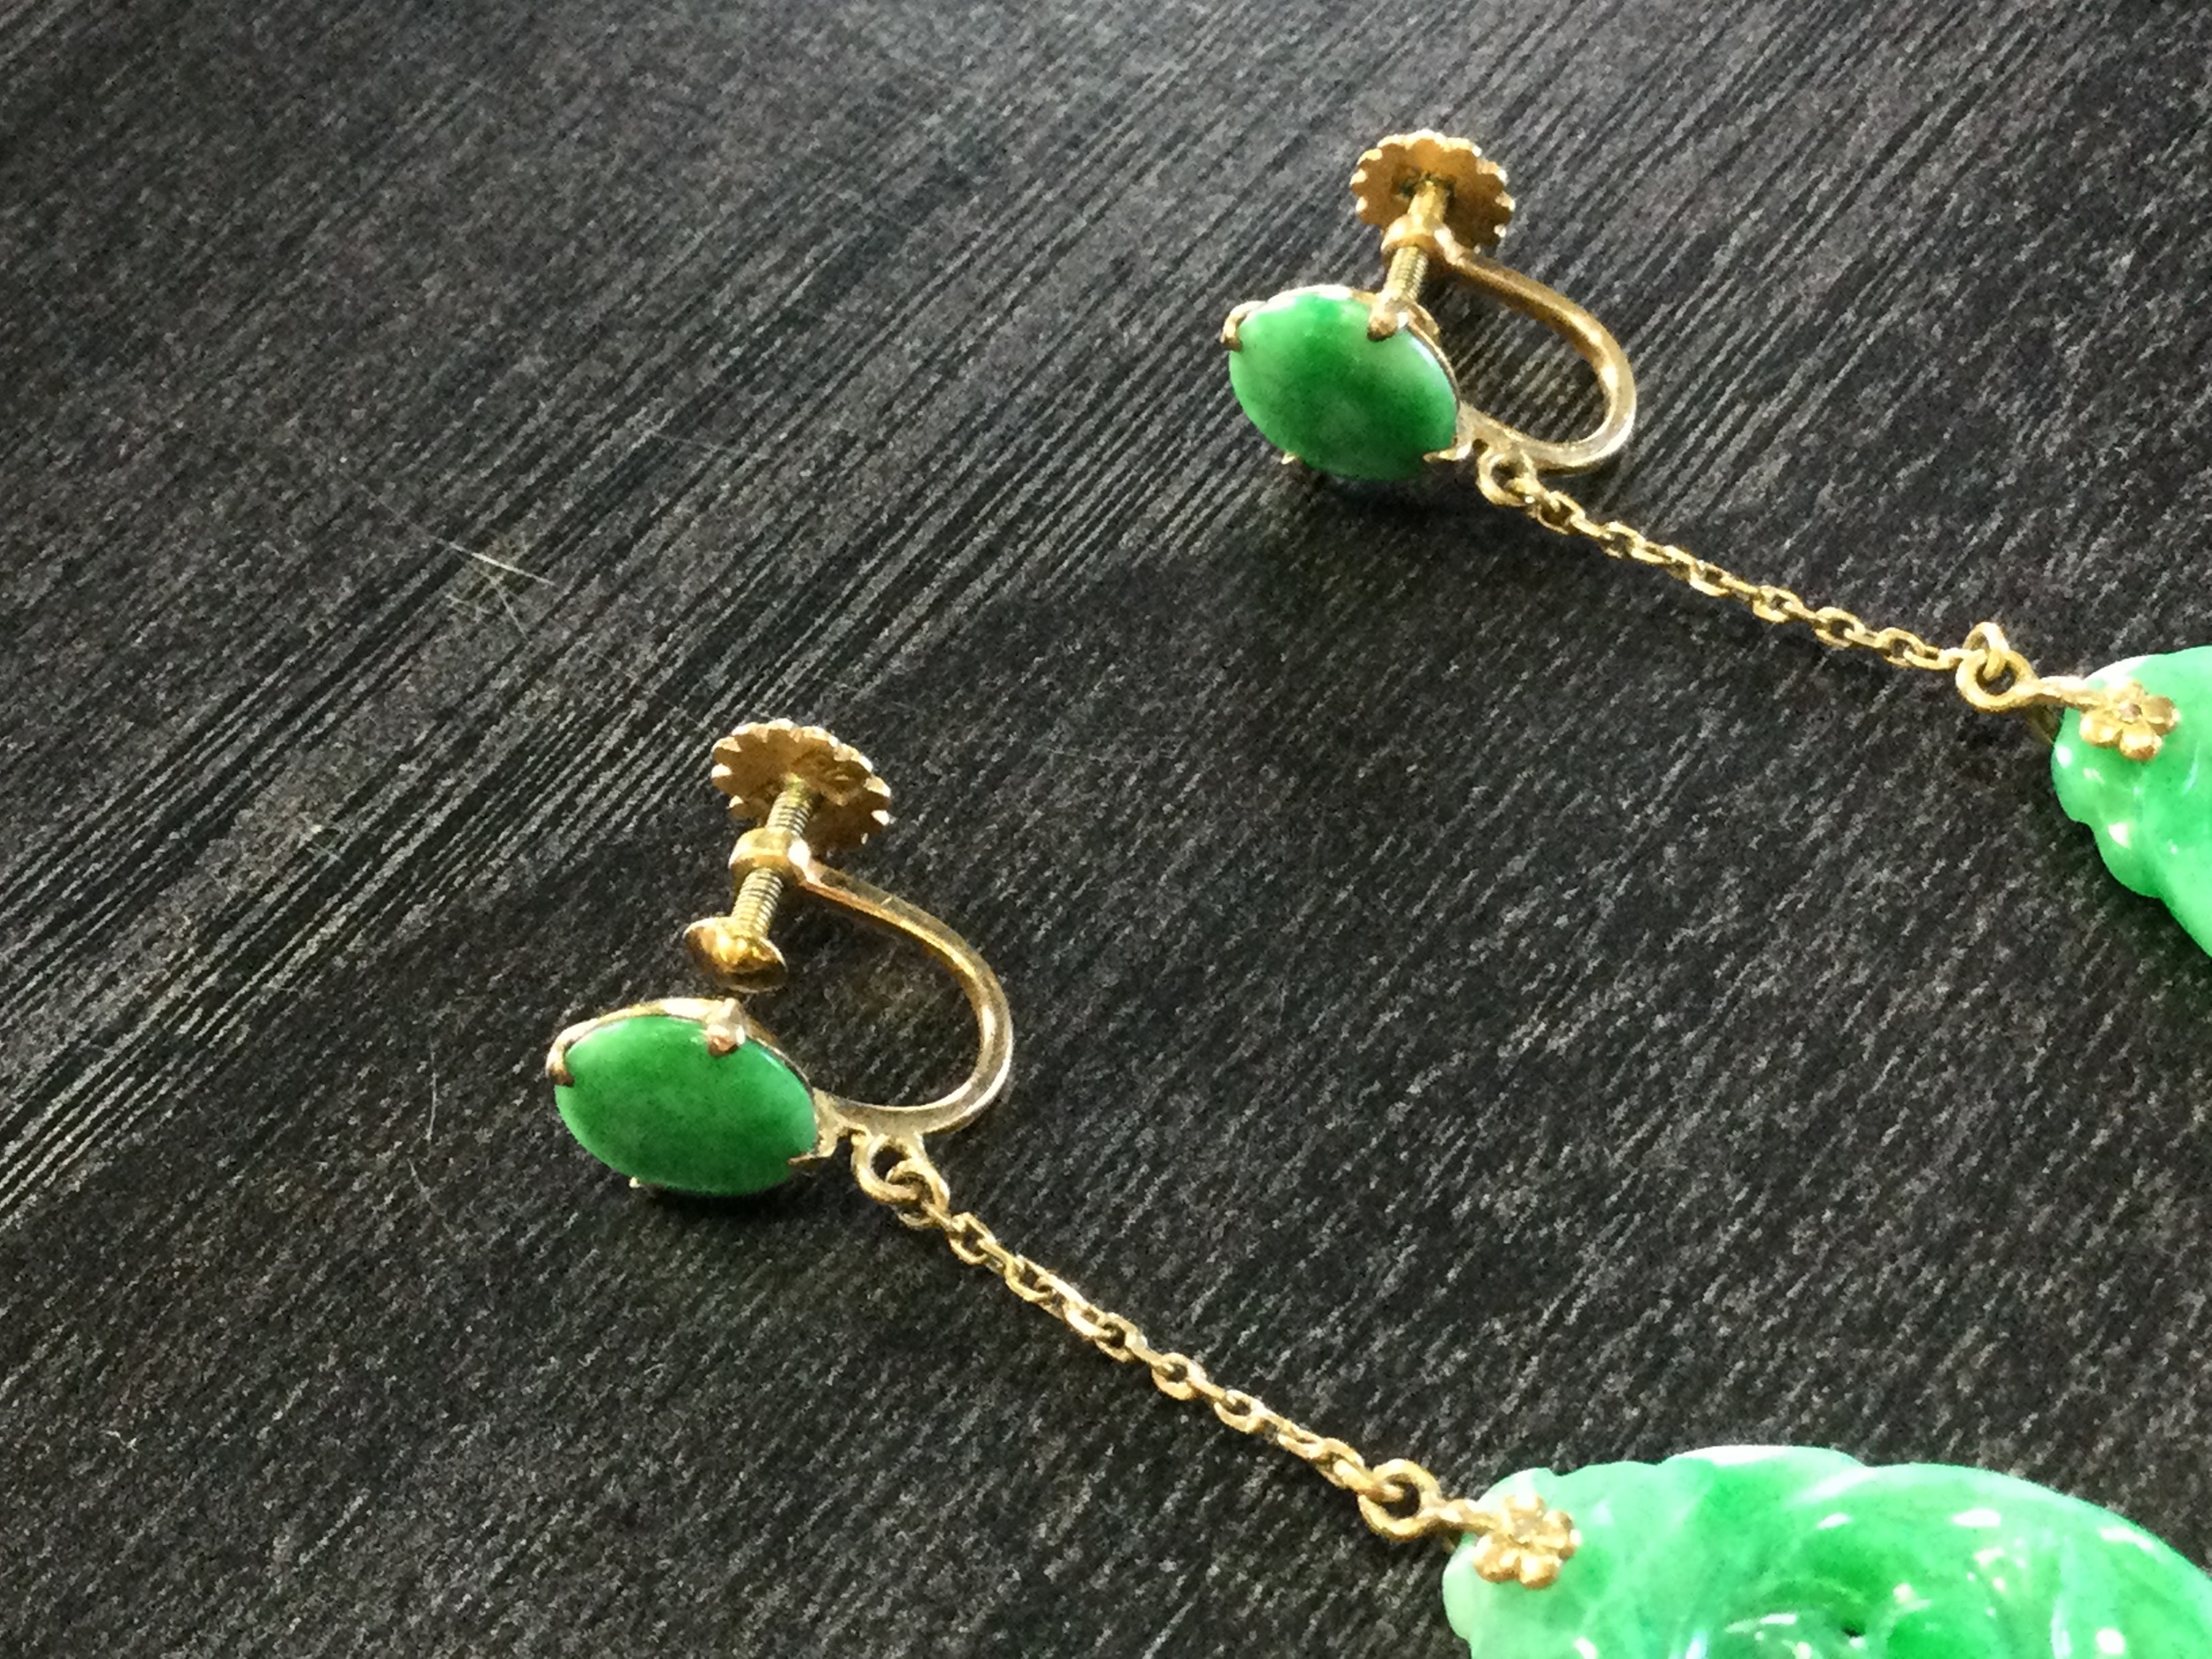 Sold at Auction: 14 KARAT YELLOW GOLD JADE EARRINGS